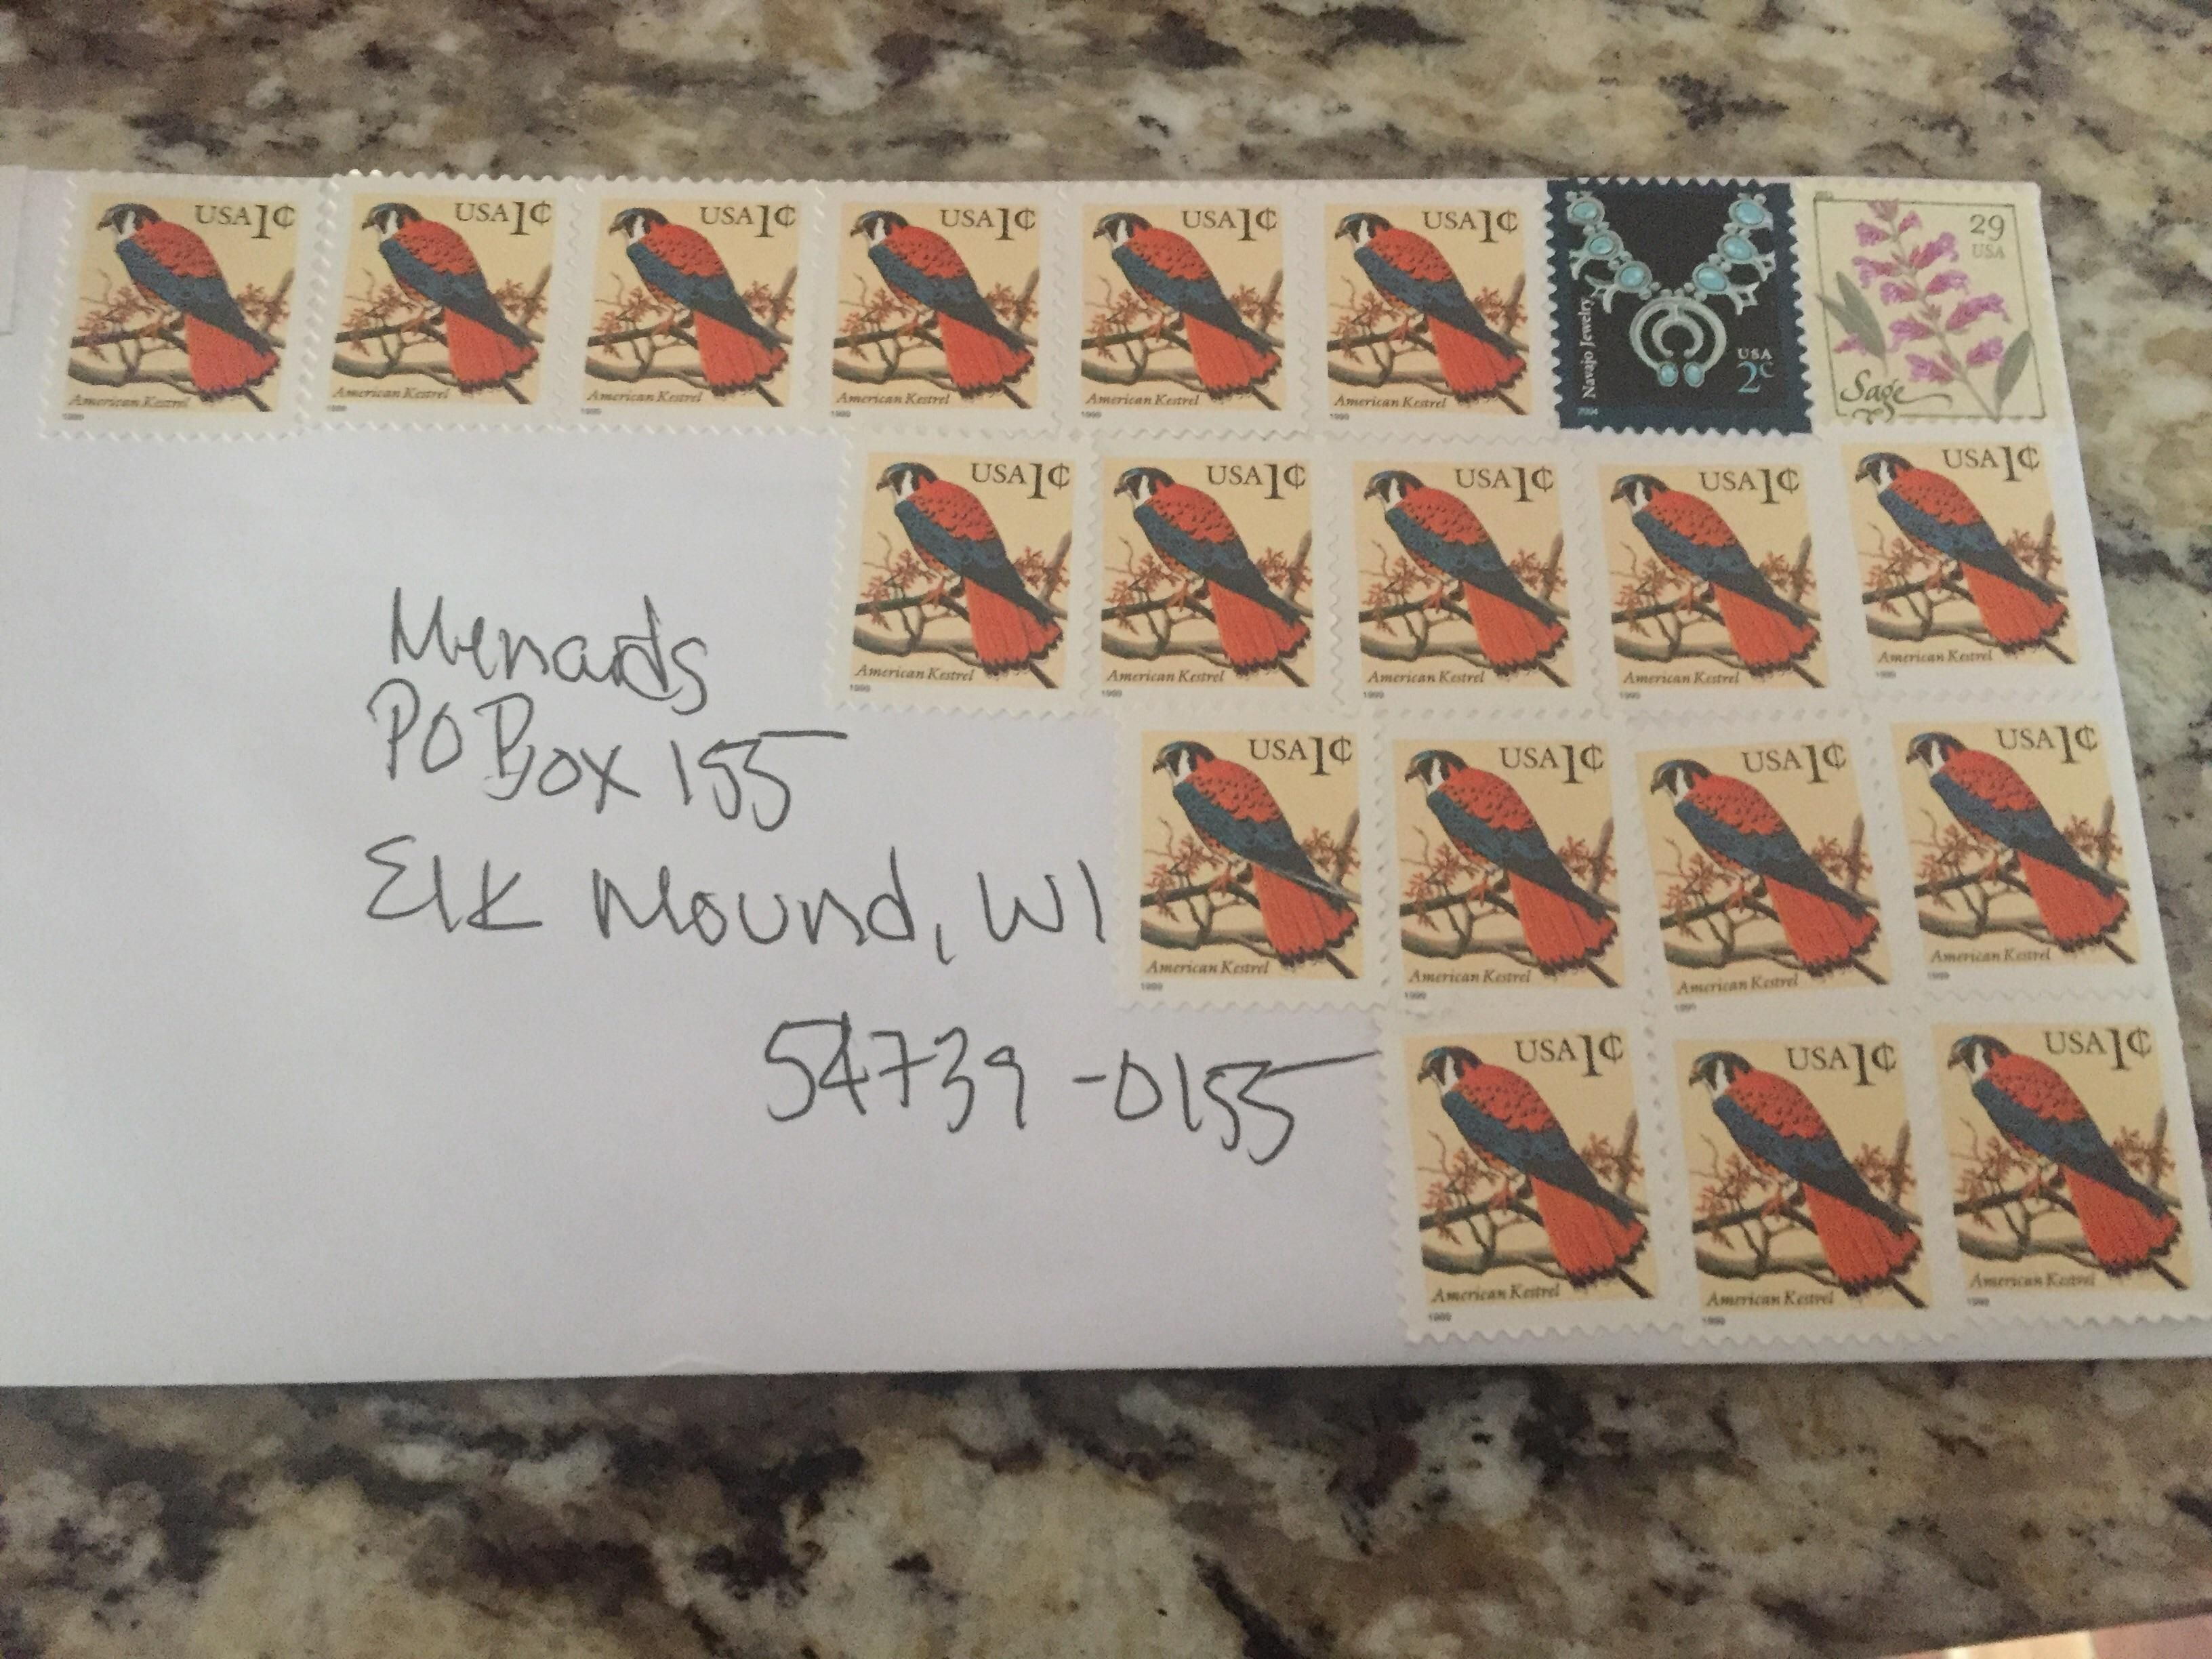 My GF is too frugal throw away 1¢ stamps THAT AREN'T EVEN HERS!!!